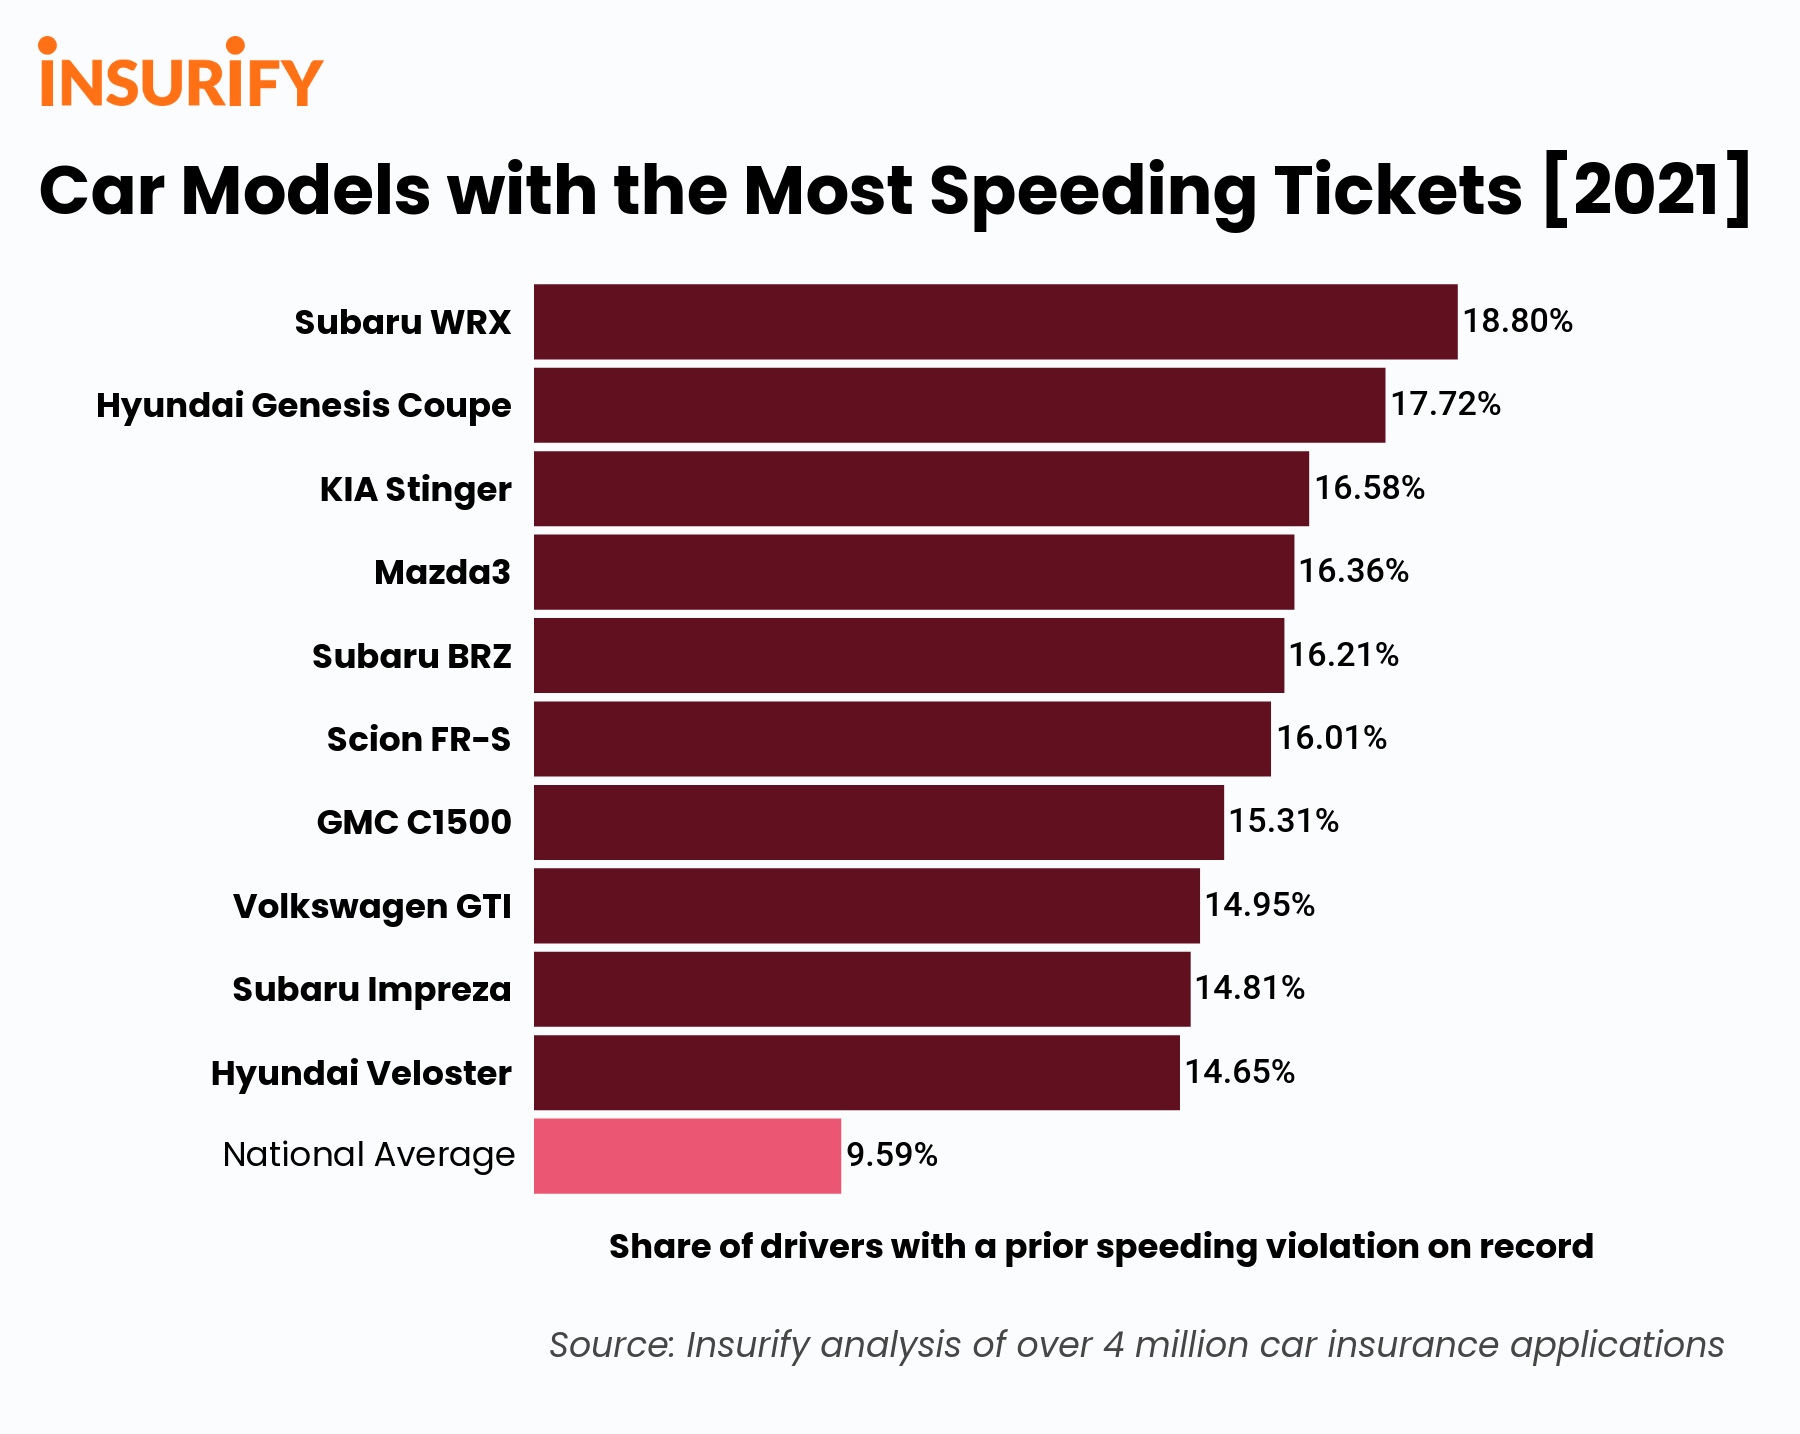 A bar graph showing the 10 car models with the highest rates of speeding violations in the nation in 2021.